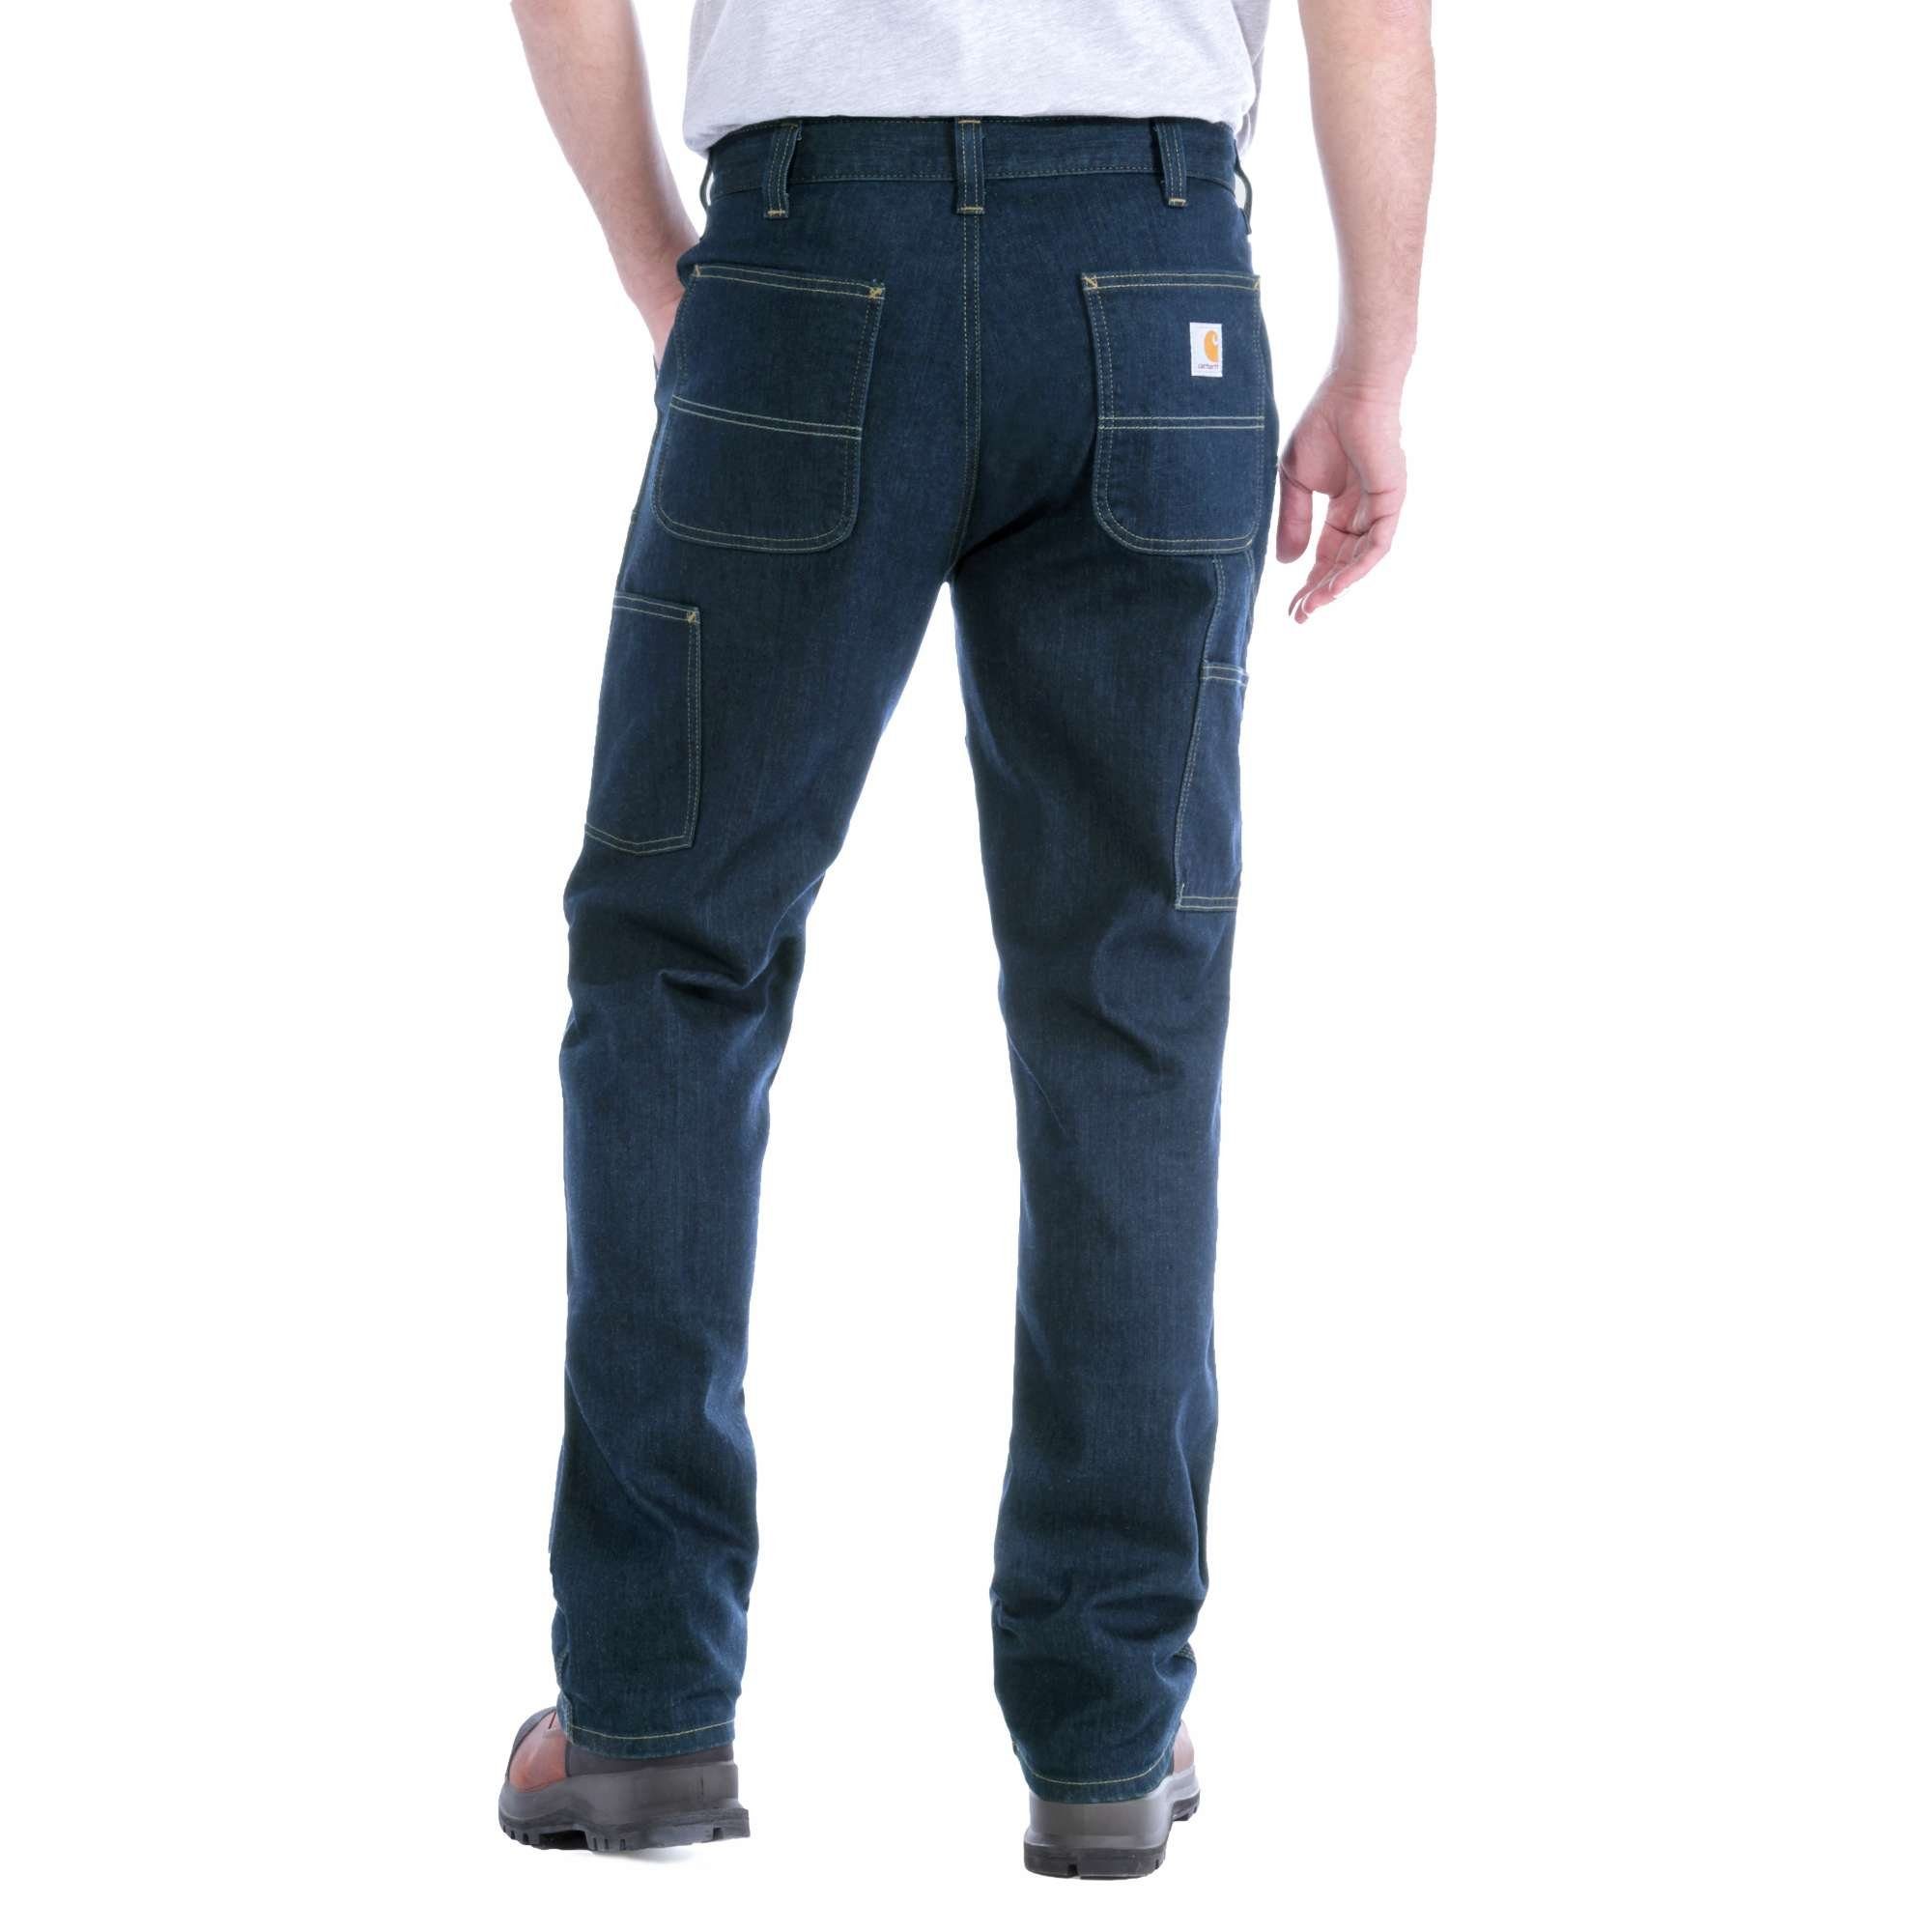 JEANS DOUBLE-FRONT Carhartt (1-tlg) Workerjeans DUNGAREE